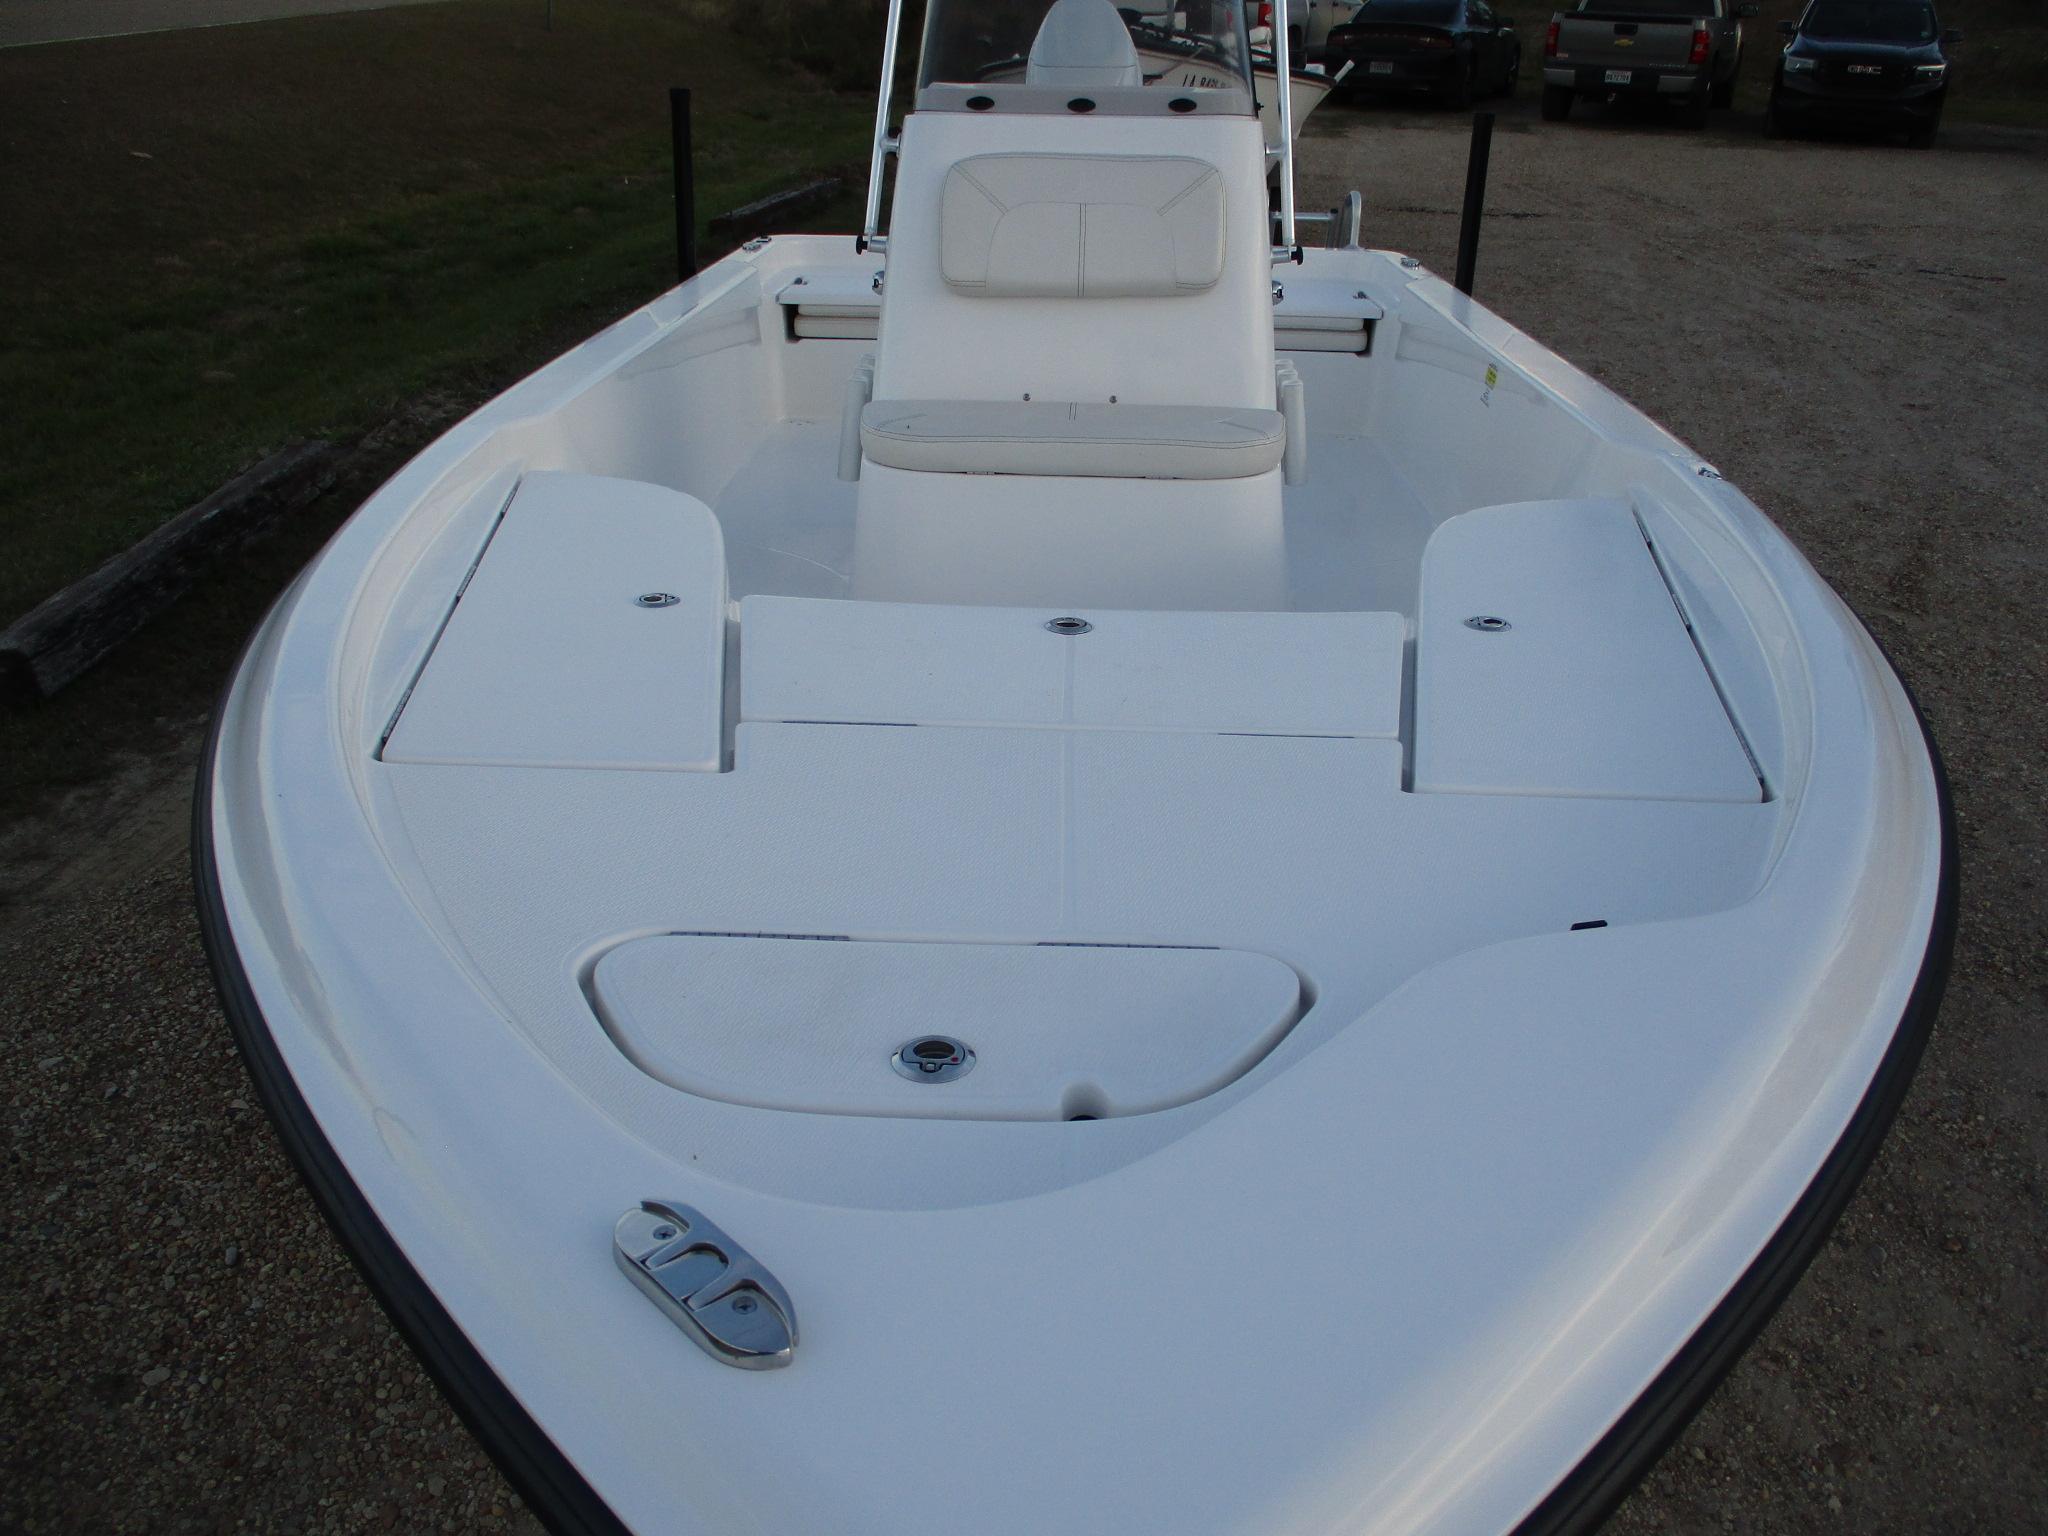 New  2022 19.58' Blue Wave 2000 Classic Bay Boat in Slidell, Louisiana